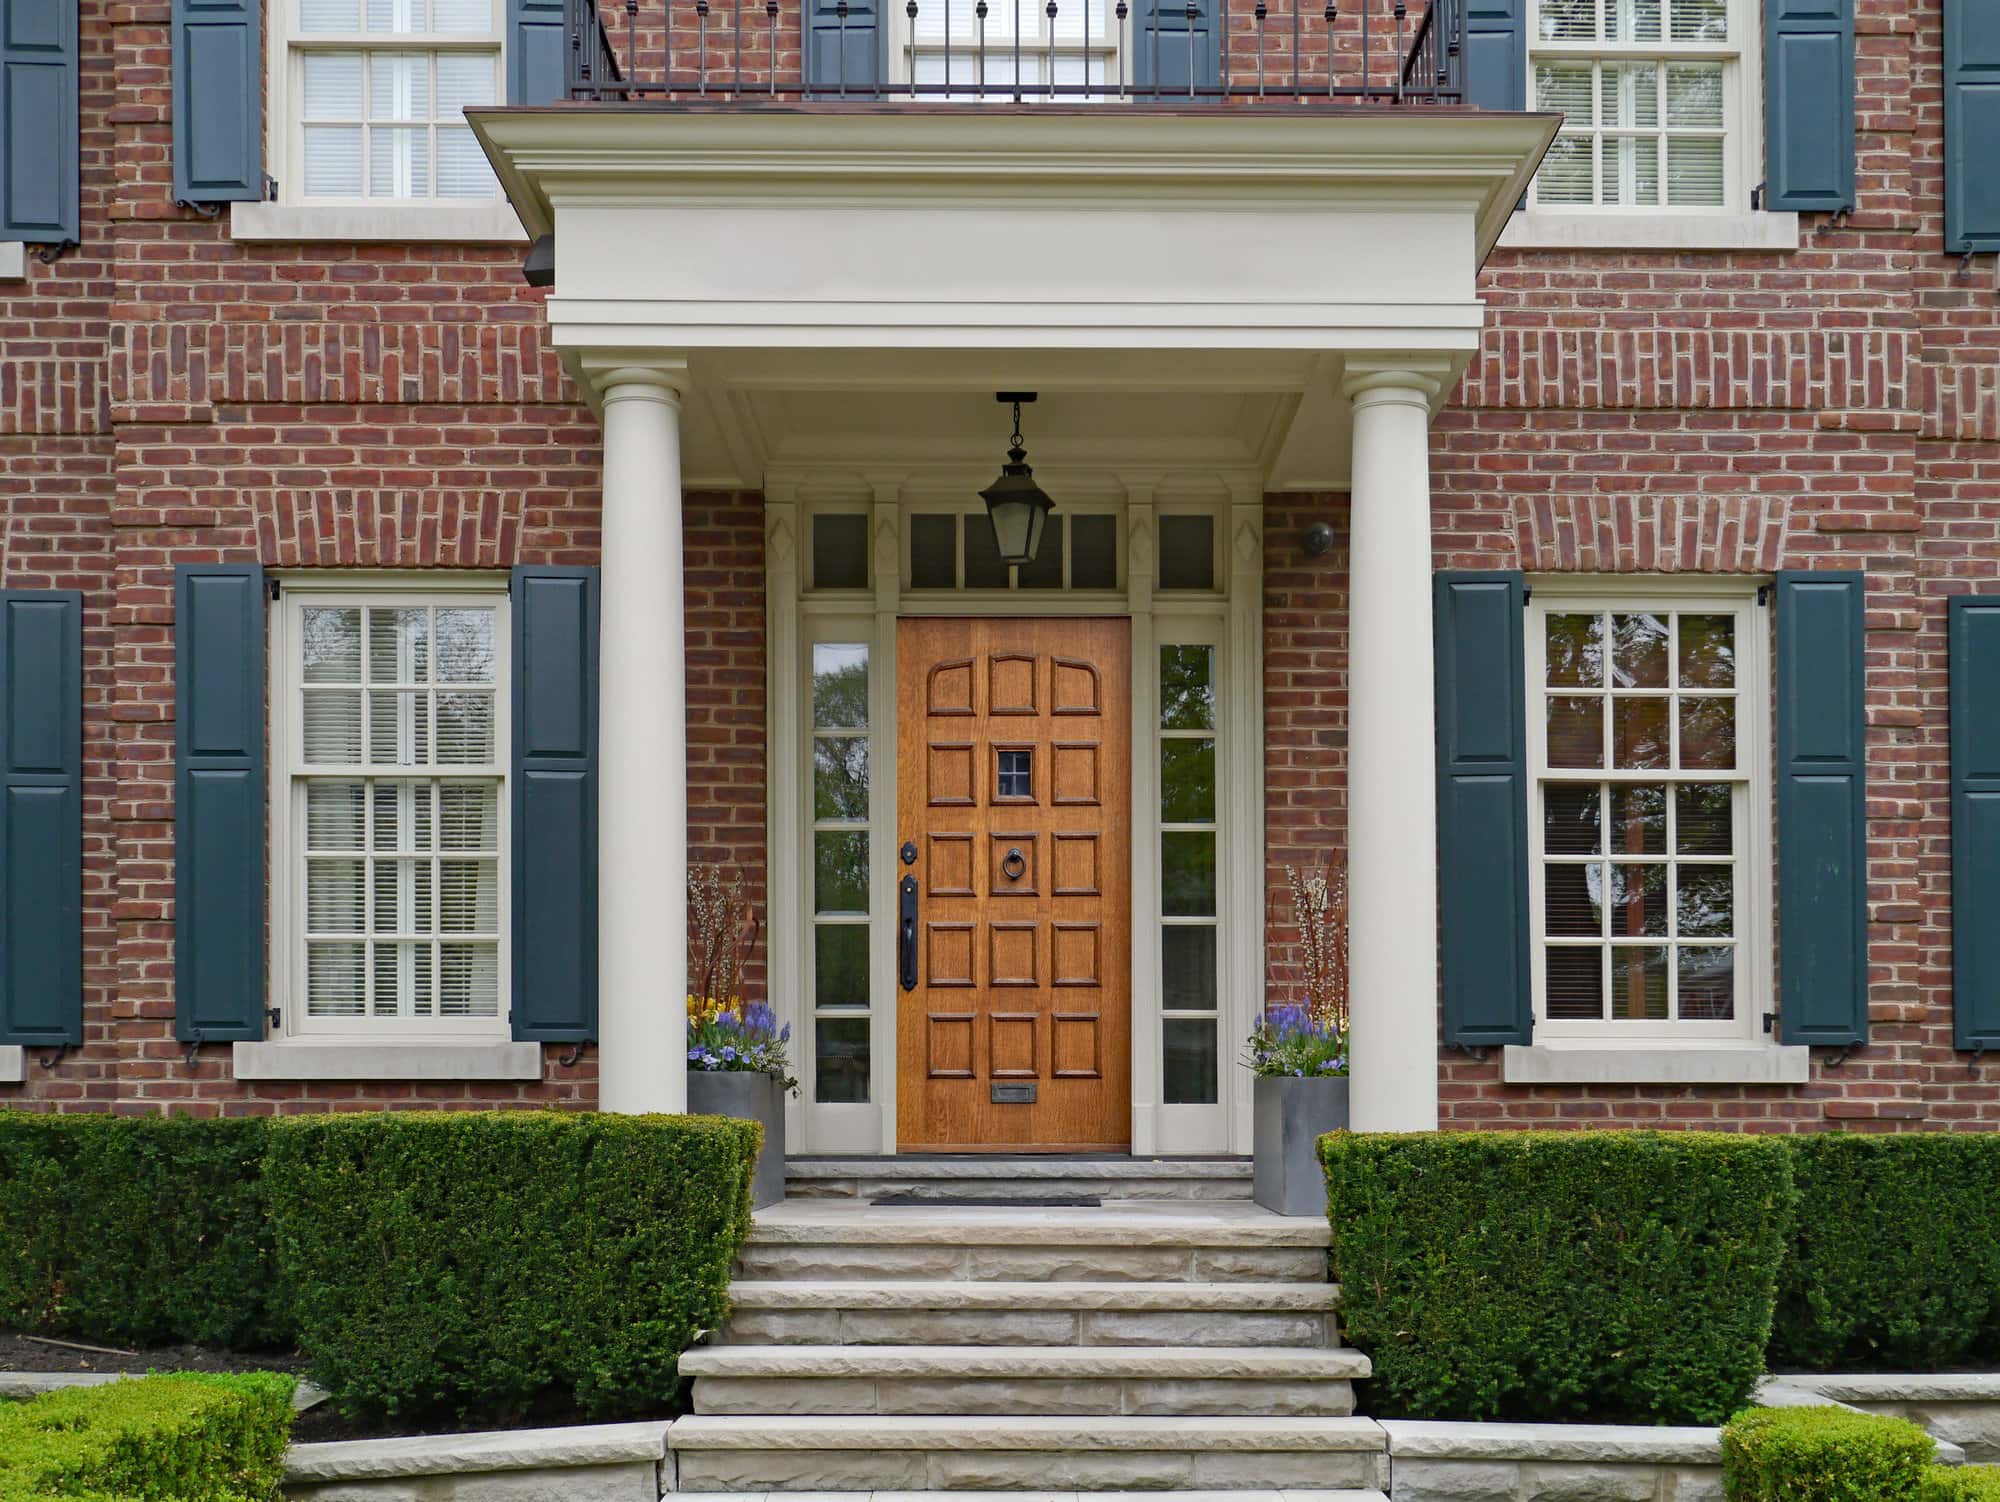  Blue Shutters and a Brown Door Will Look Phenomenal With Your Brick Exterior